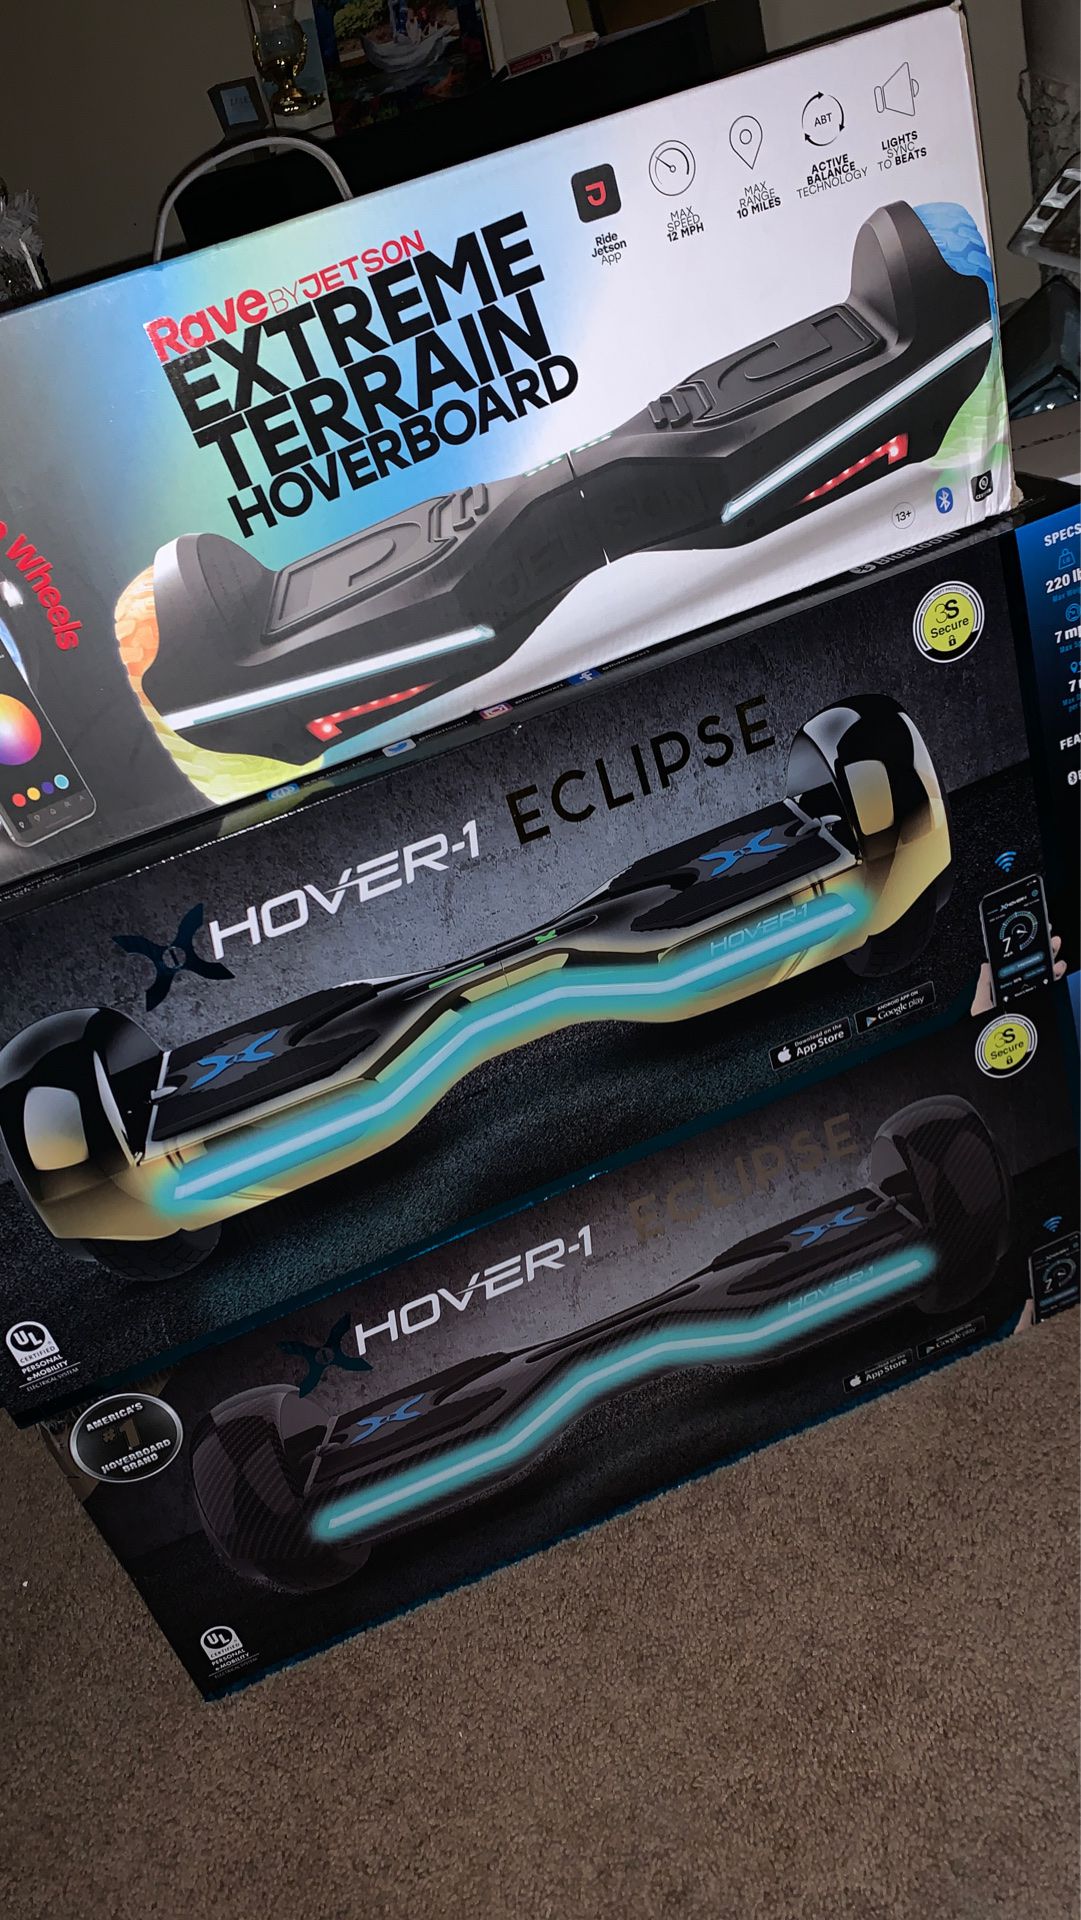 Hover-1 Eclipse & Extreme Terrain Hoverboards